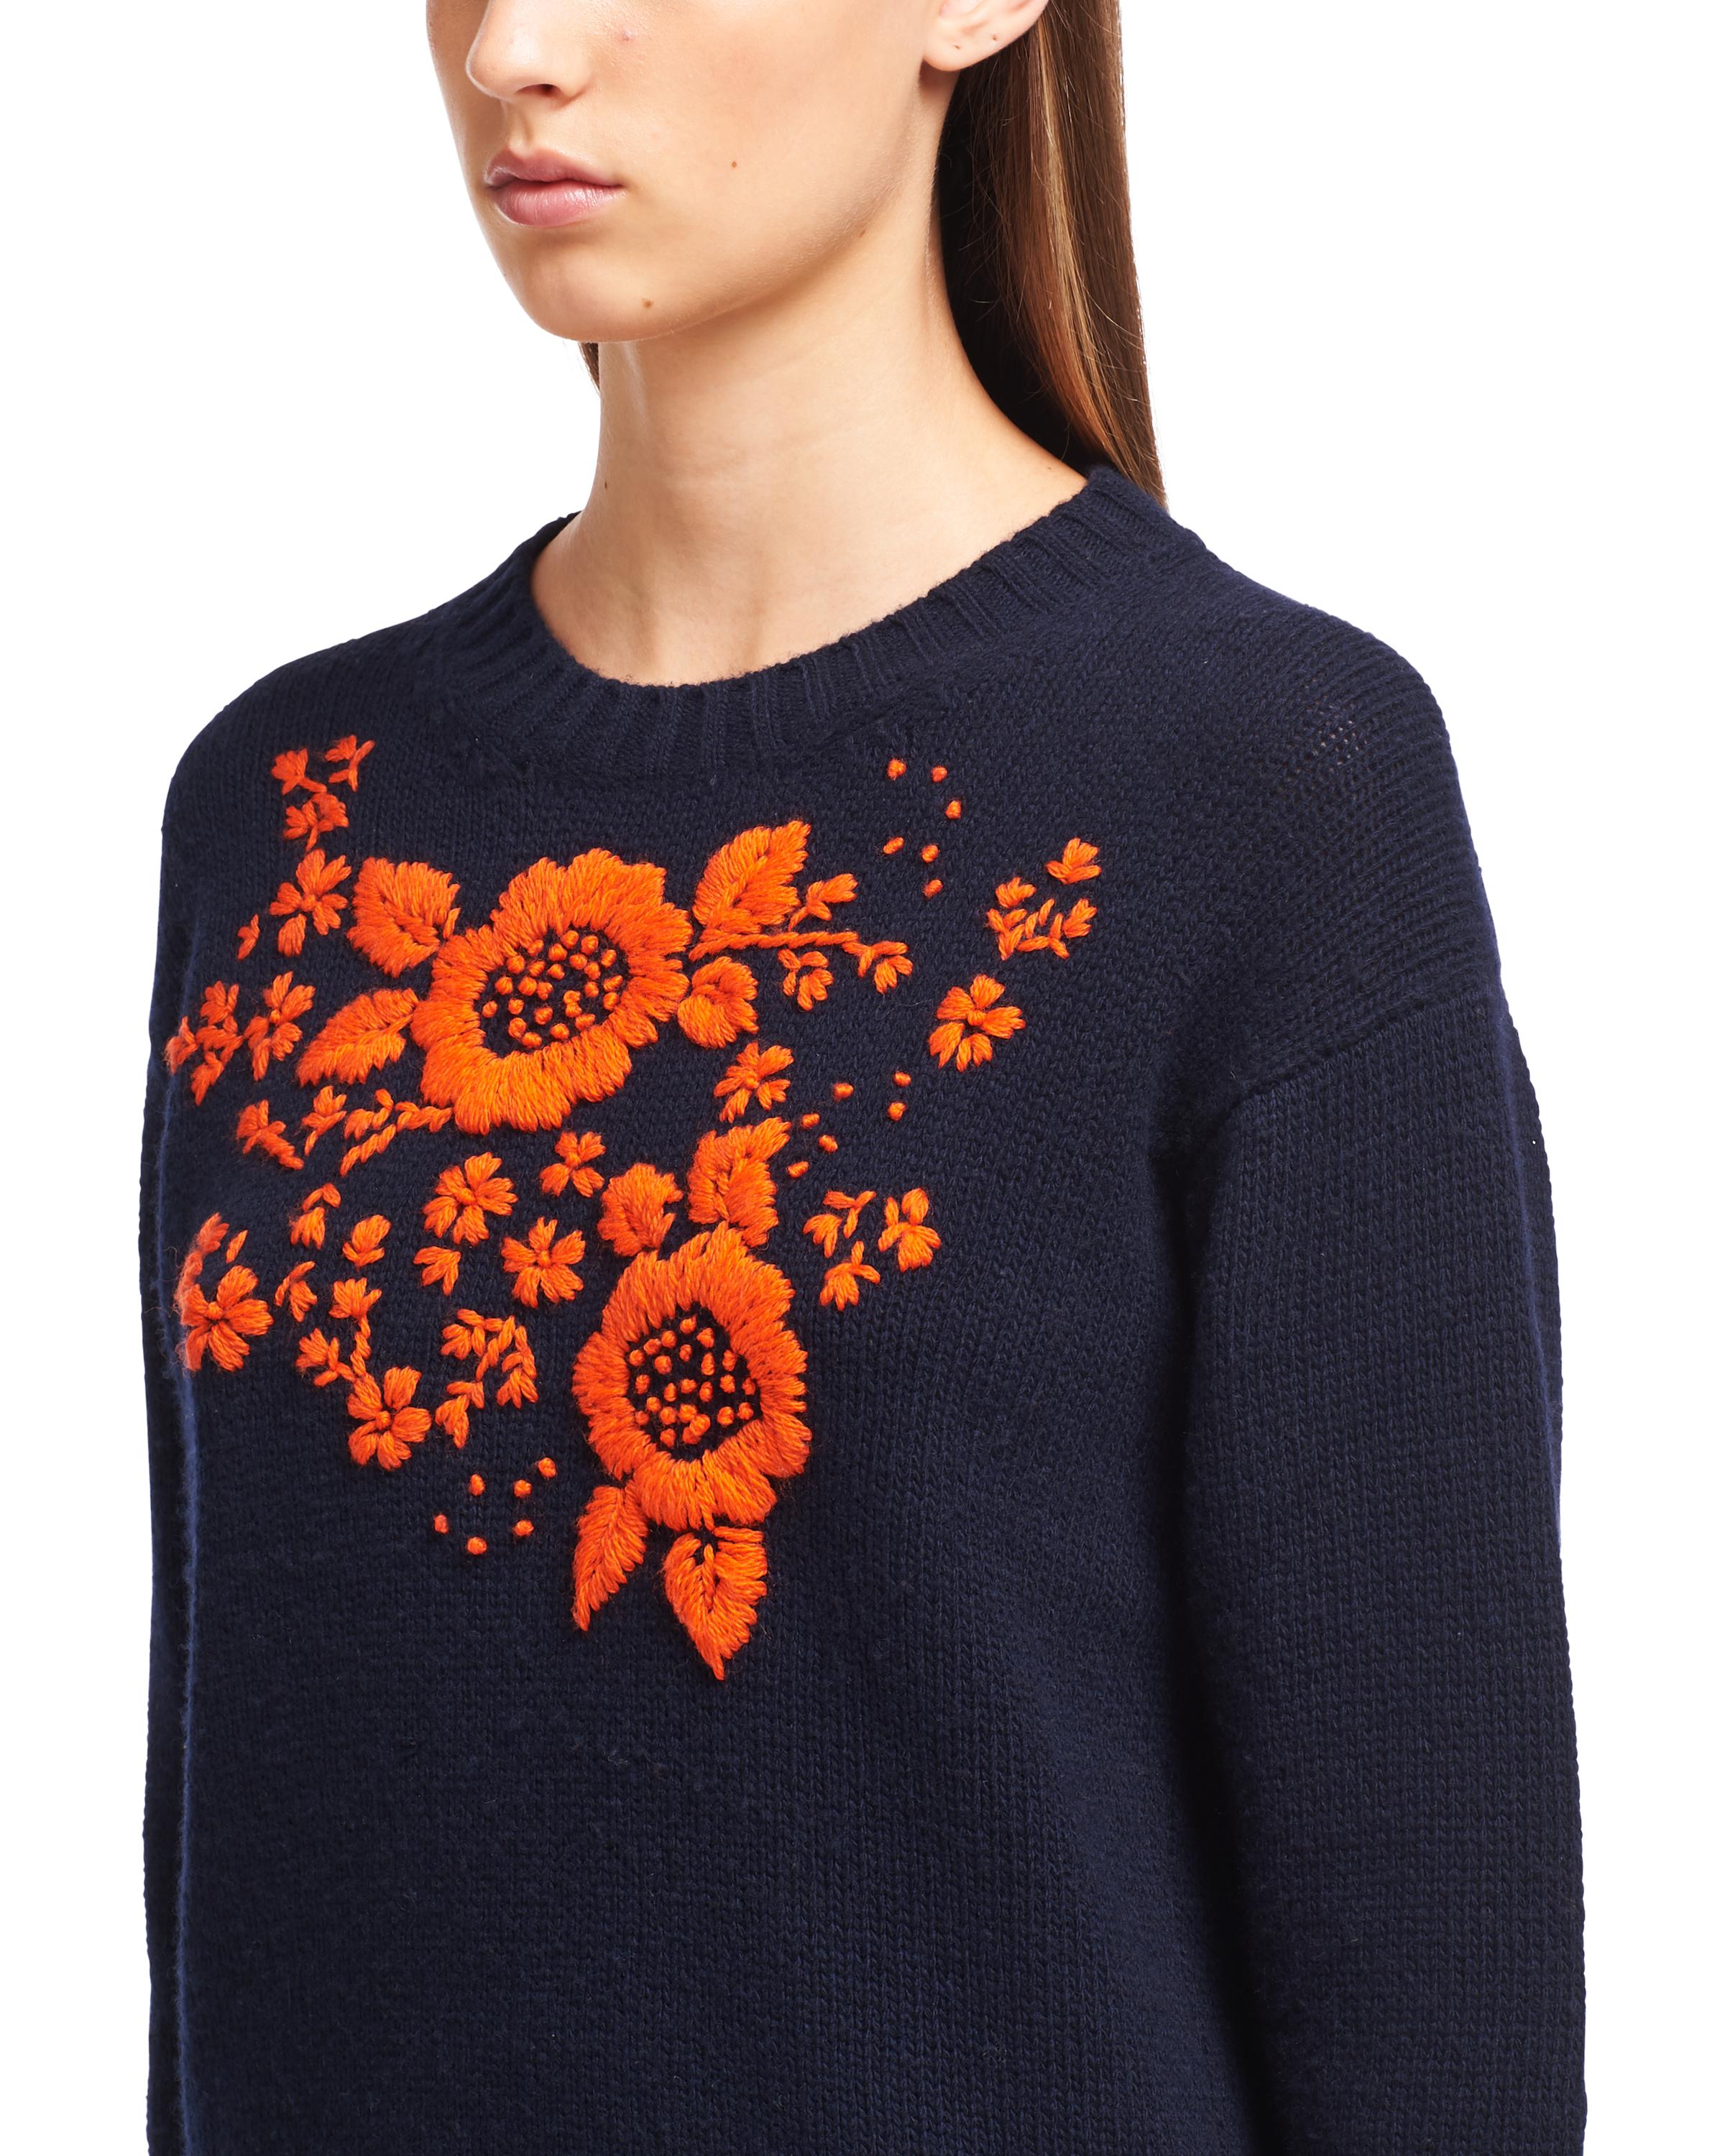 Prada Embroidered Wool And Cashmere Crew-neck Sweater in Navy Blue